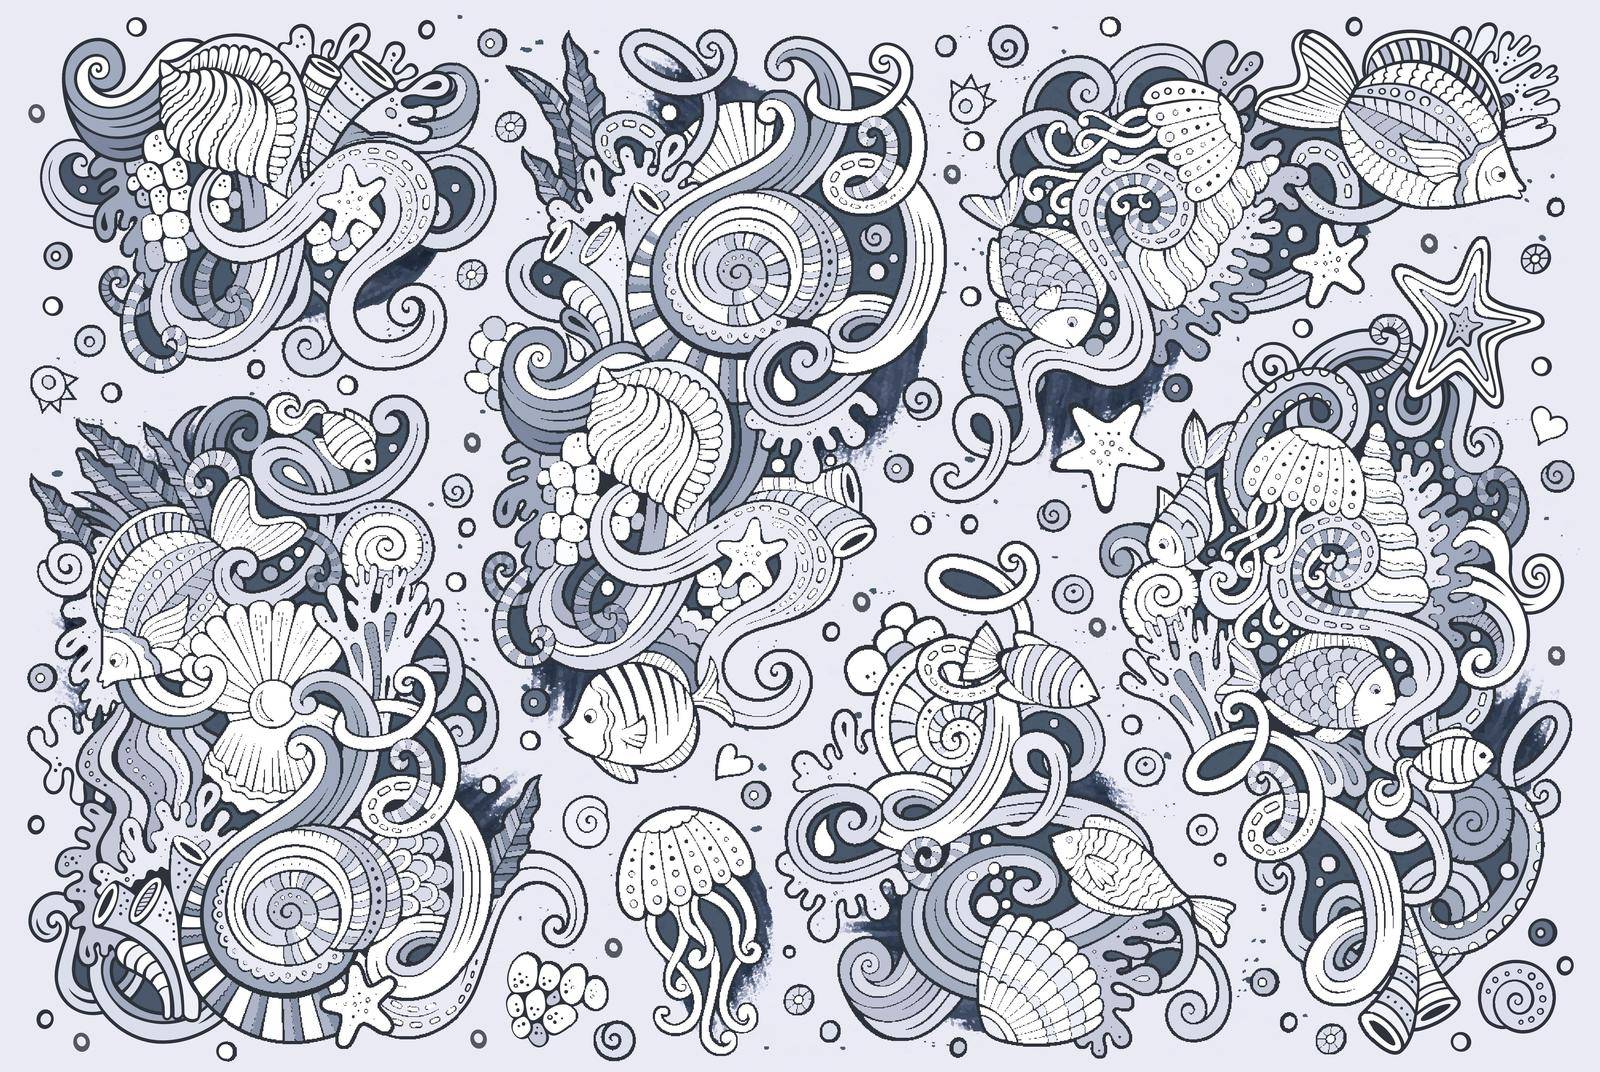 Line art vector hand drawn Doodle cartoon set of marine life objects and symbols